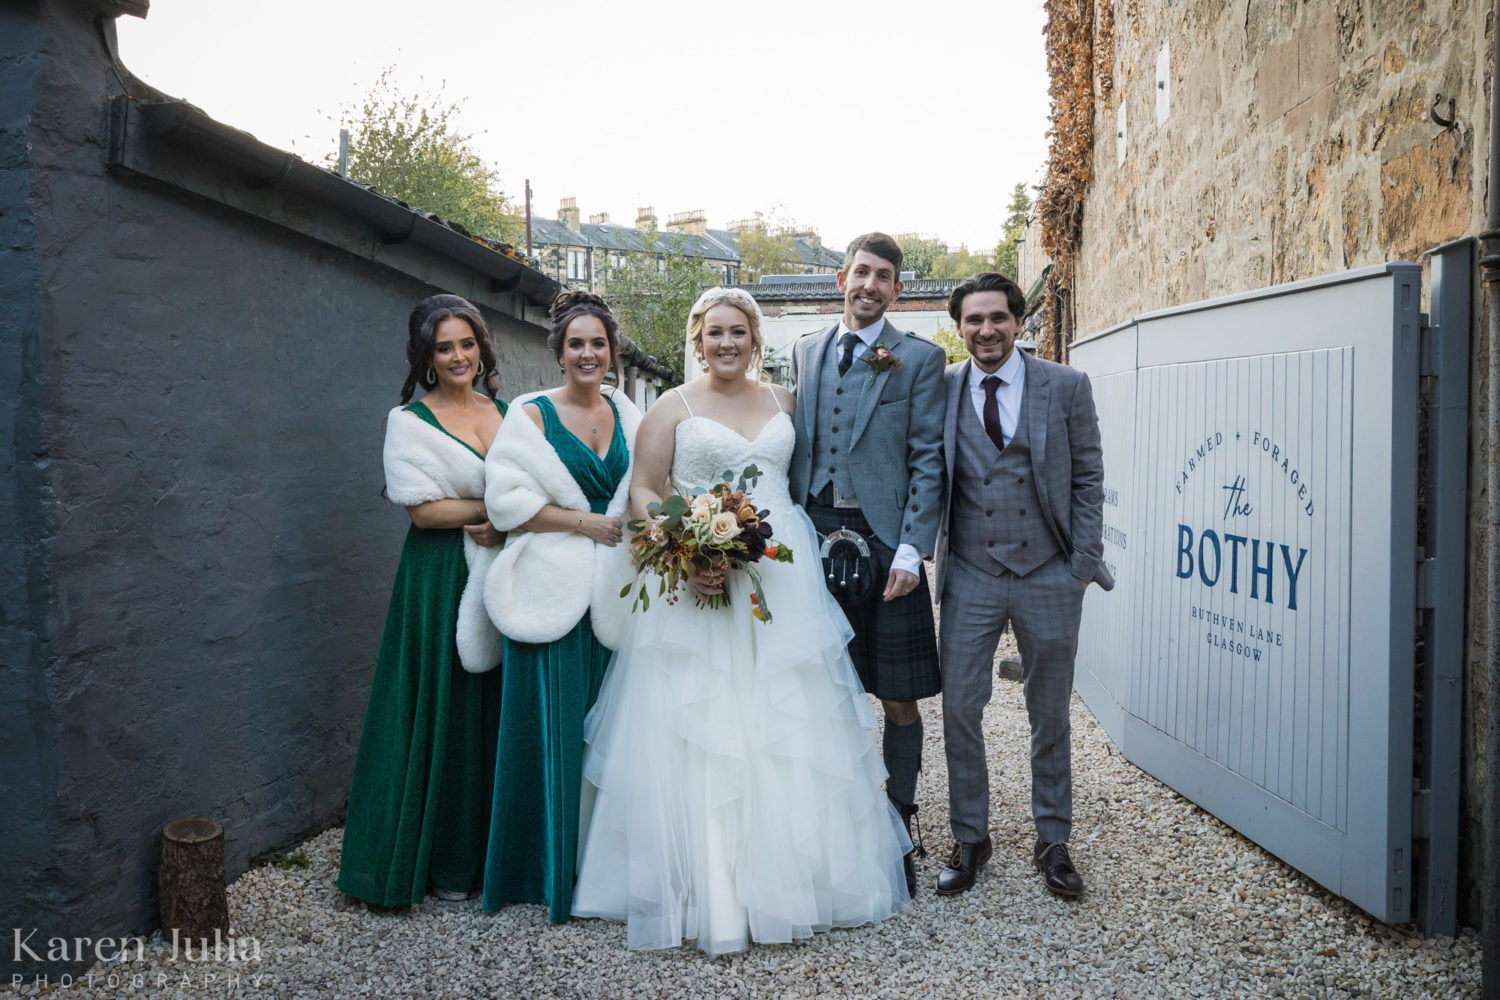 wedding party group photo at the bothy